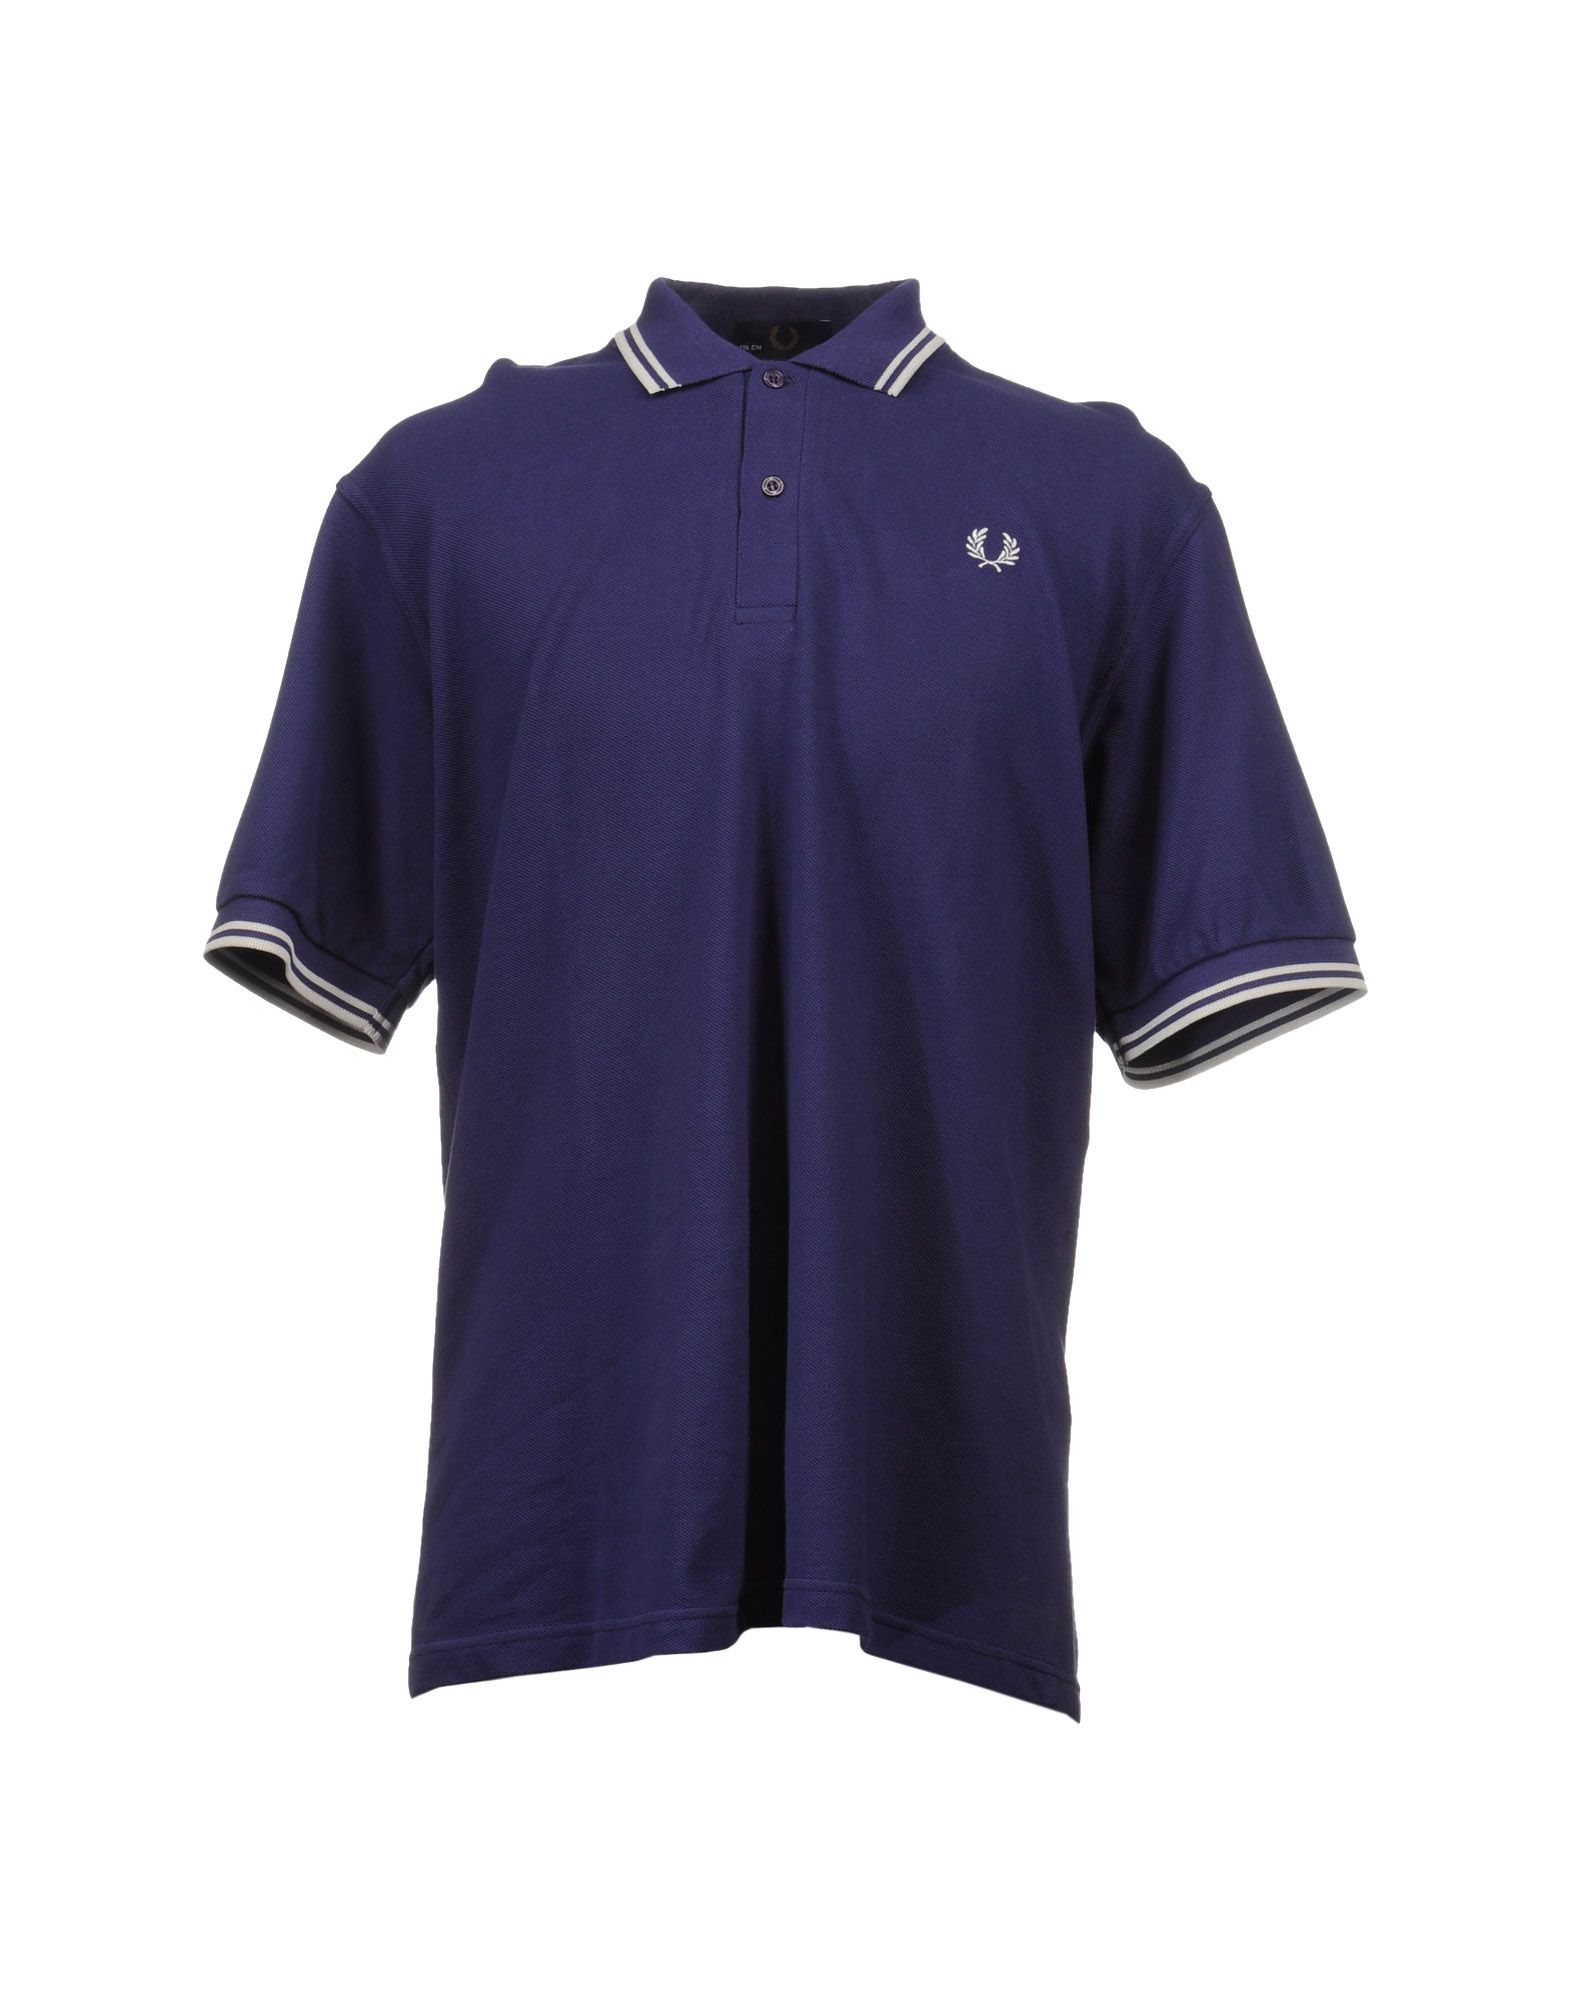 Foto fred perry polos
 foto 321551